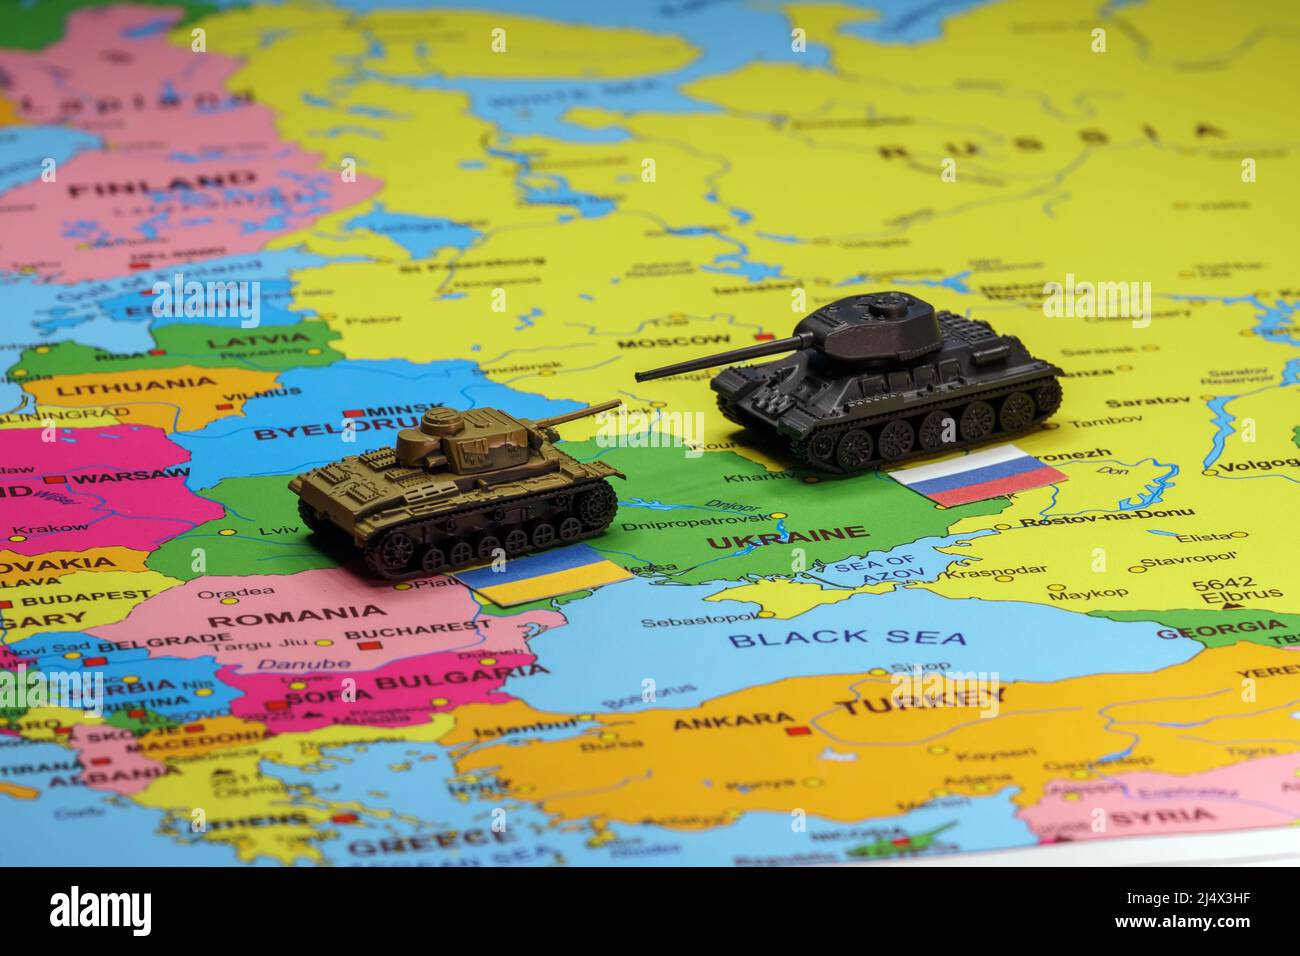 Armed conflict between Russia and Ukraine on the map of Europe. Stock Photo